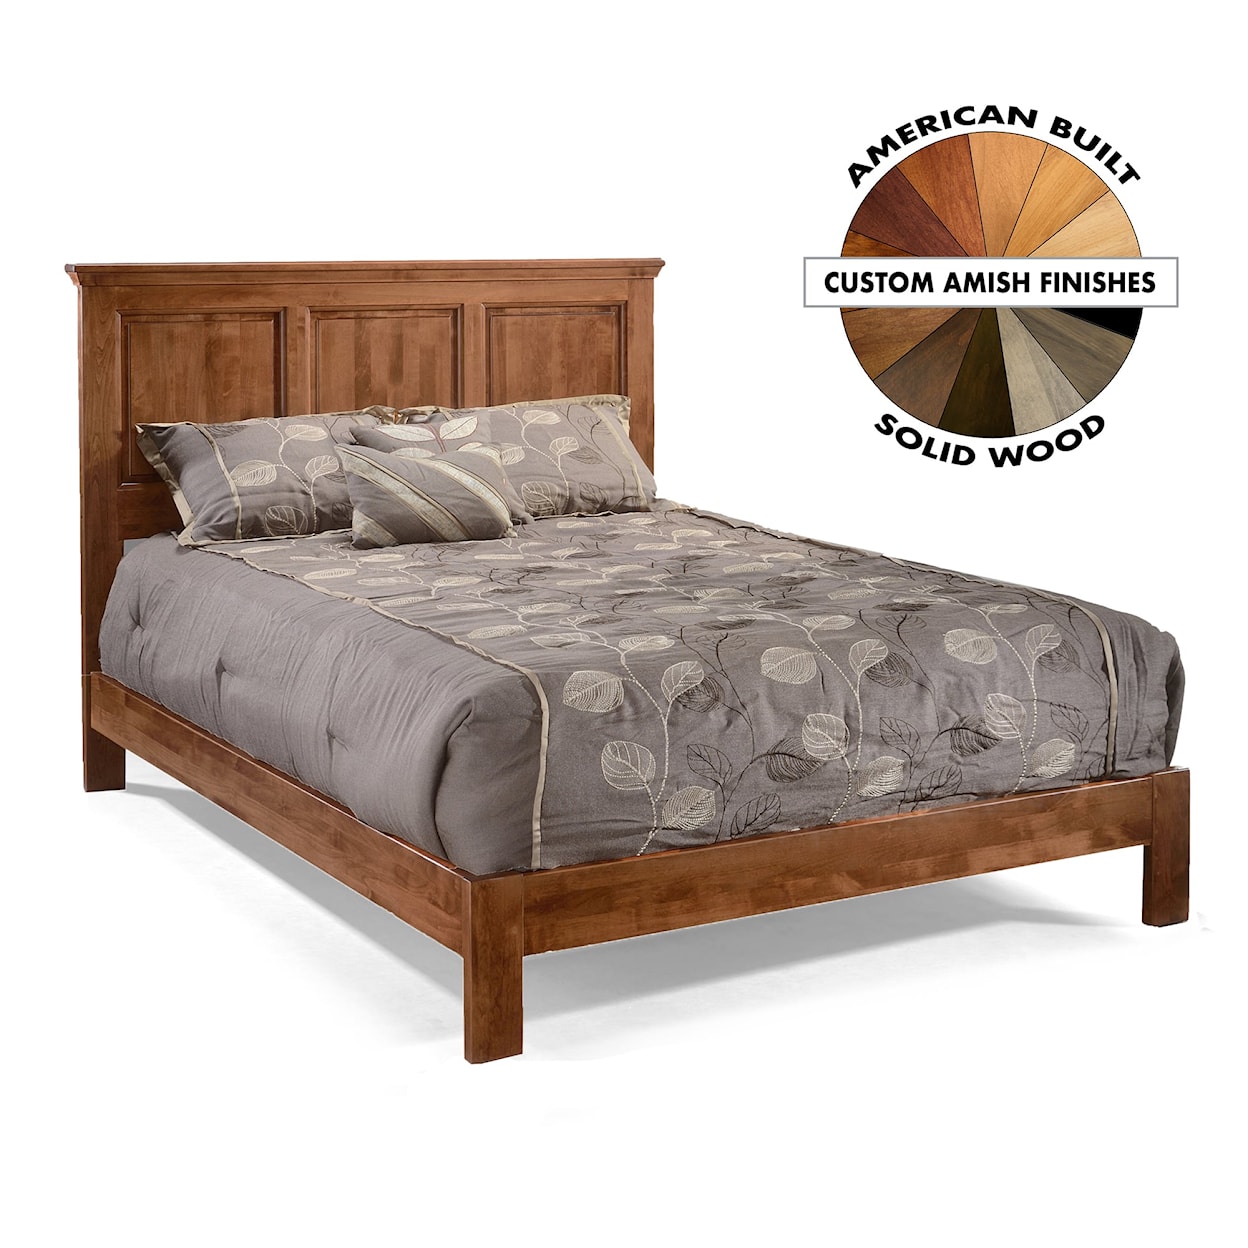 Archbold Furniture Heritage Queen Raised Panel Bed